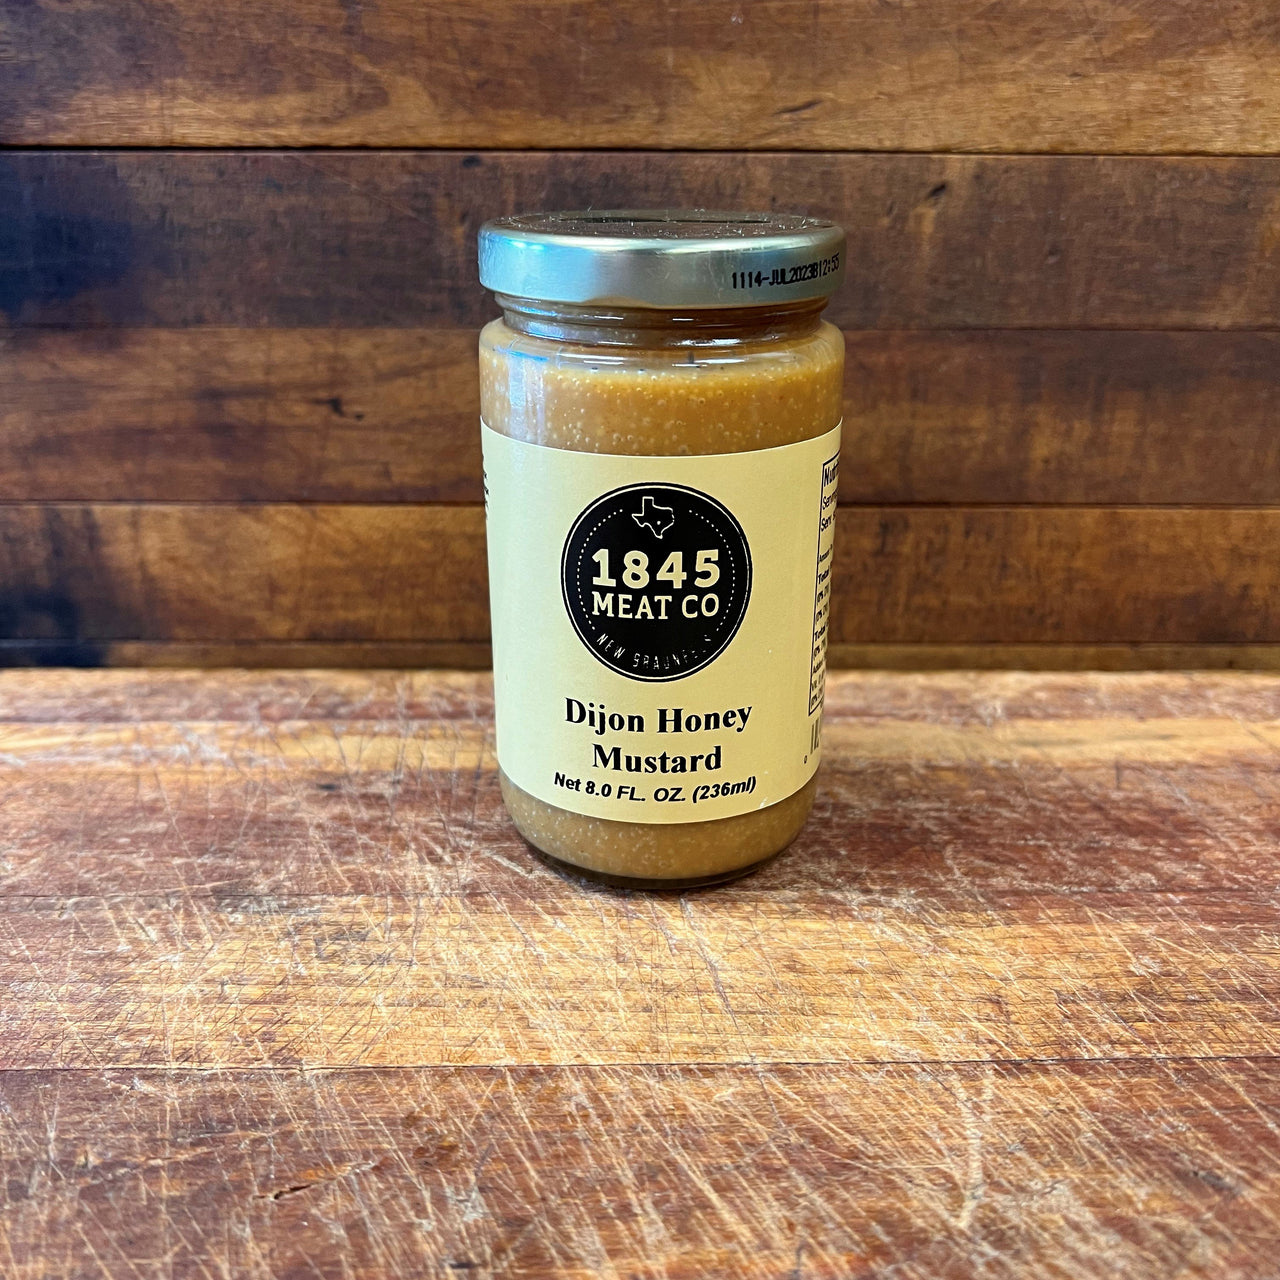 A classic Dijon Honey Mustard that is a perfect complement to our smoked meats and cheeses.  Also great on your sandwich or as a dressing on your next salad!